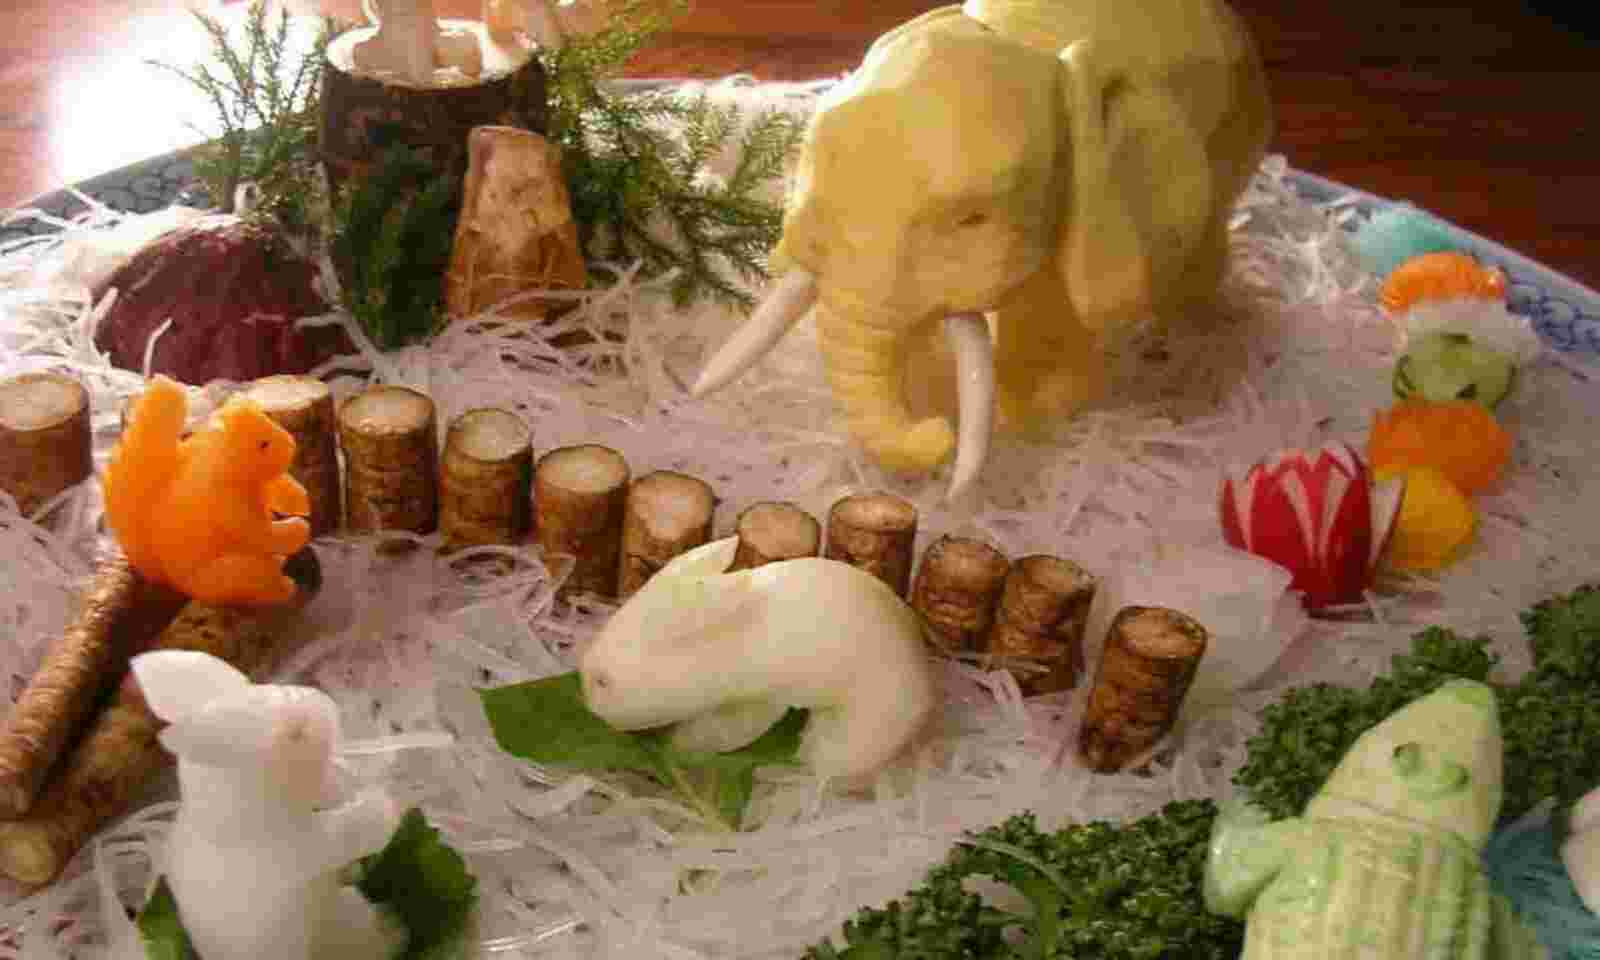 vegetable carving with theme